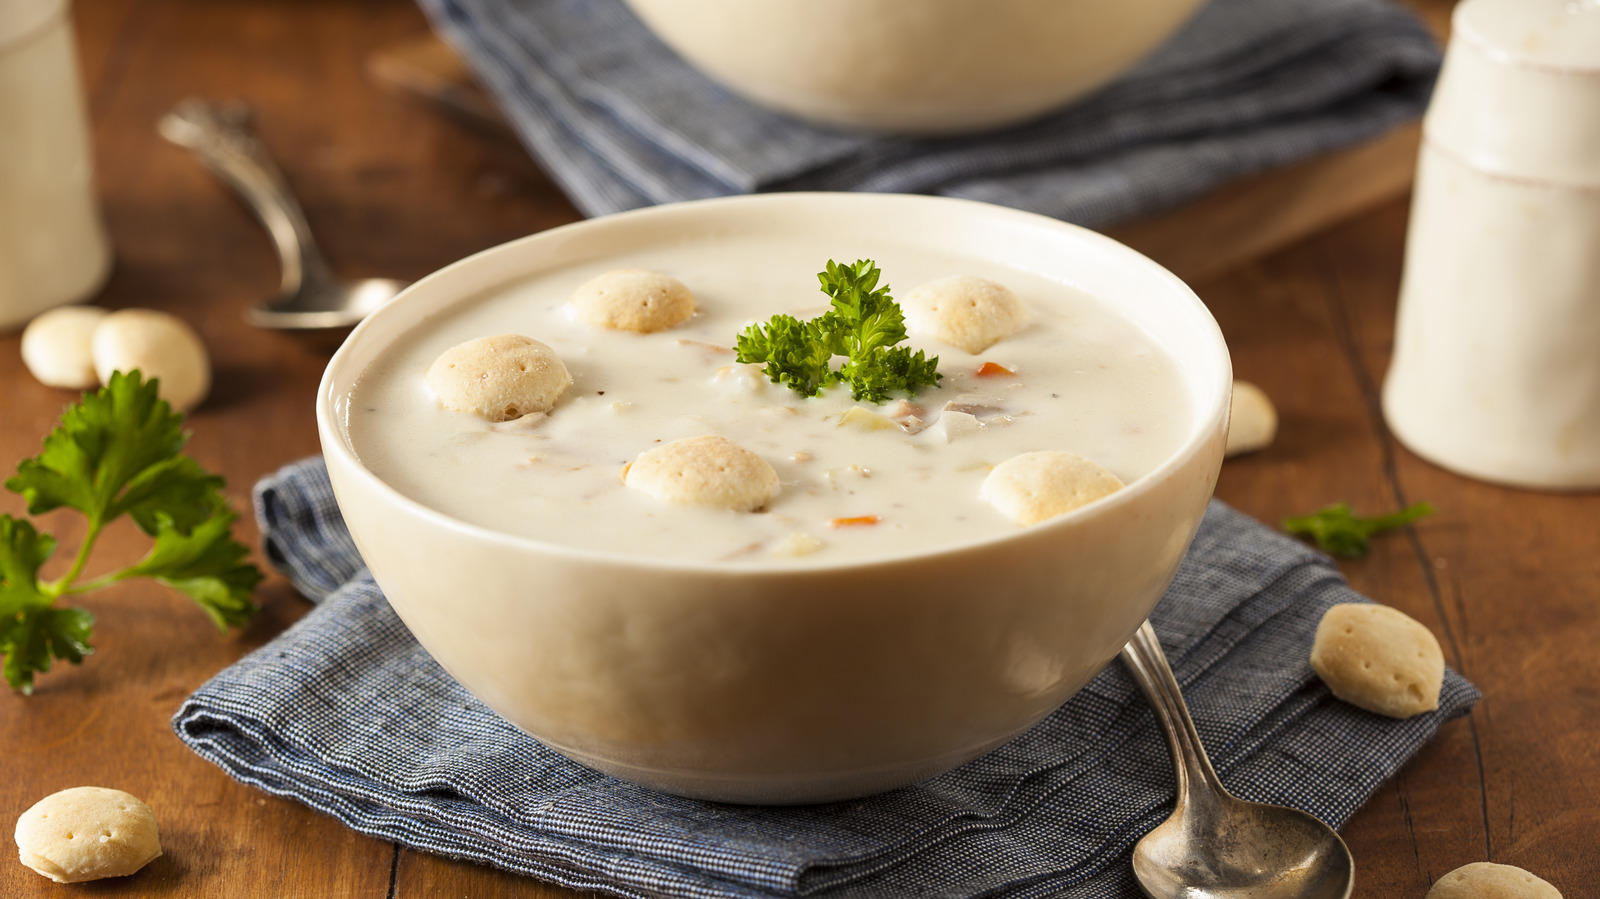 https://www.thedailymeal.com/img/gallery/12-ways-chefs-like-to-upgrade-their-clam-chowder/l-intro-1682546745.jpg